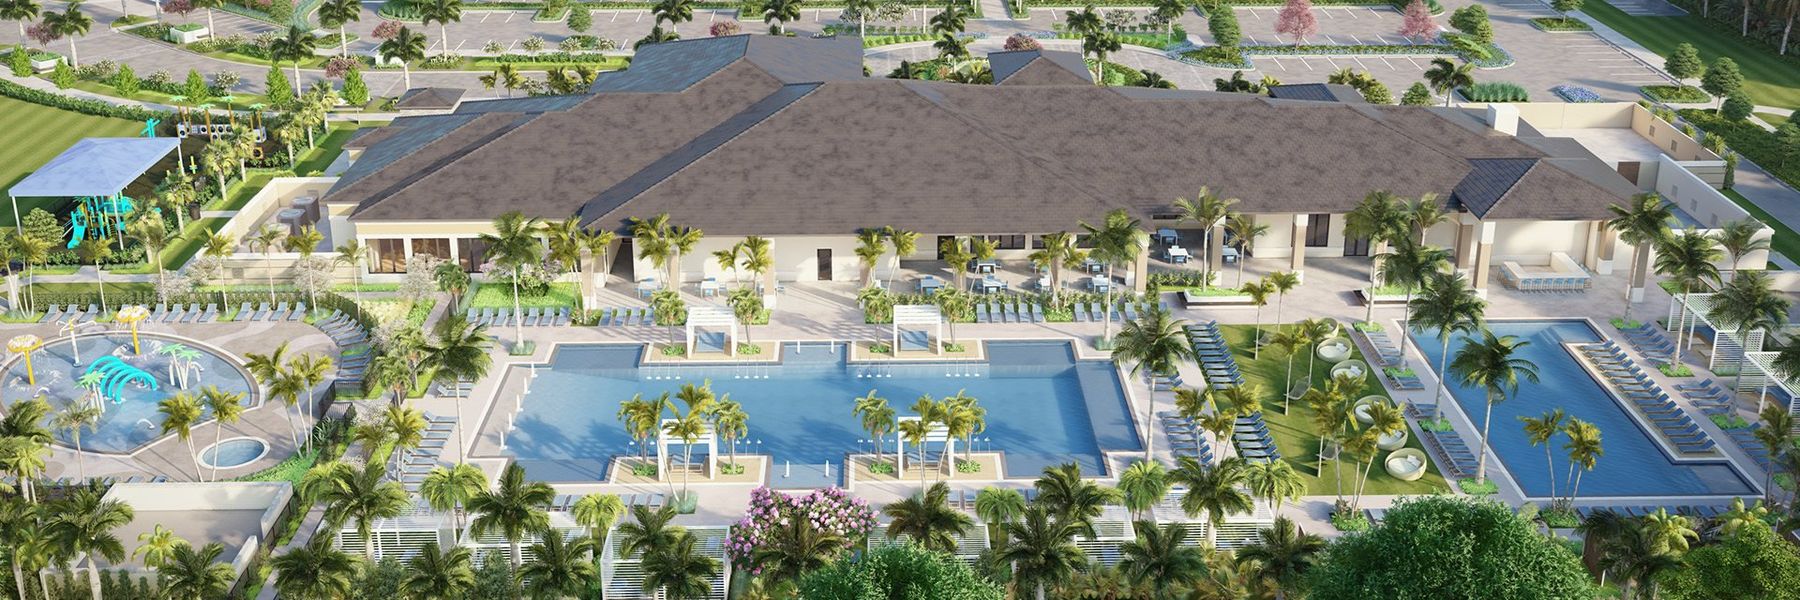 Aerial View of Avenir West Clubhouse Pools - Artist Concept